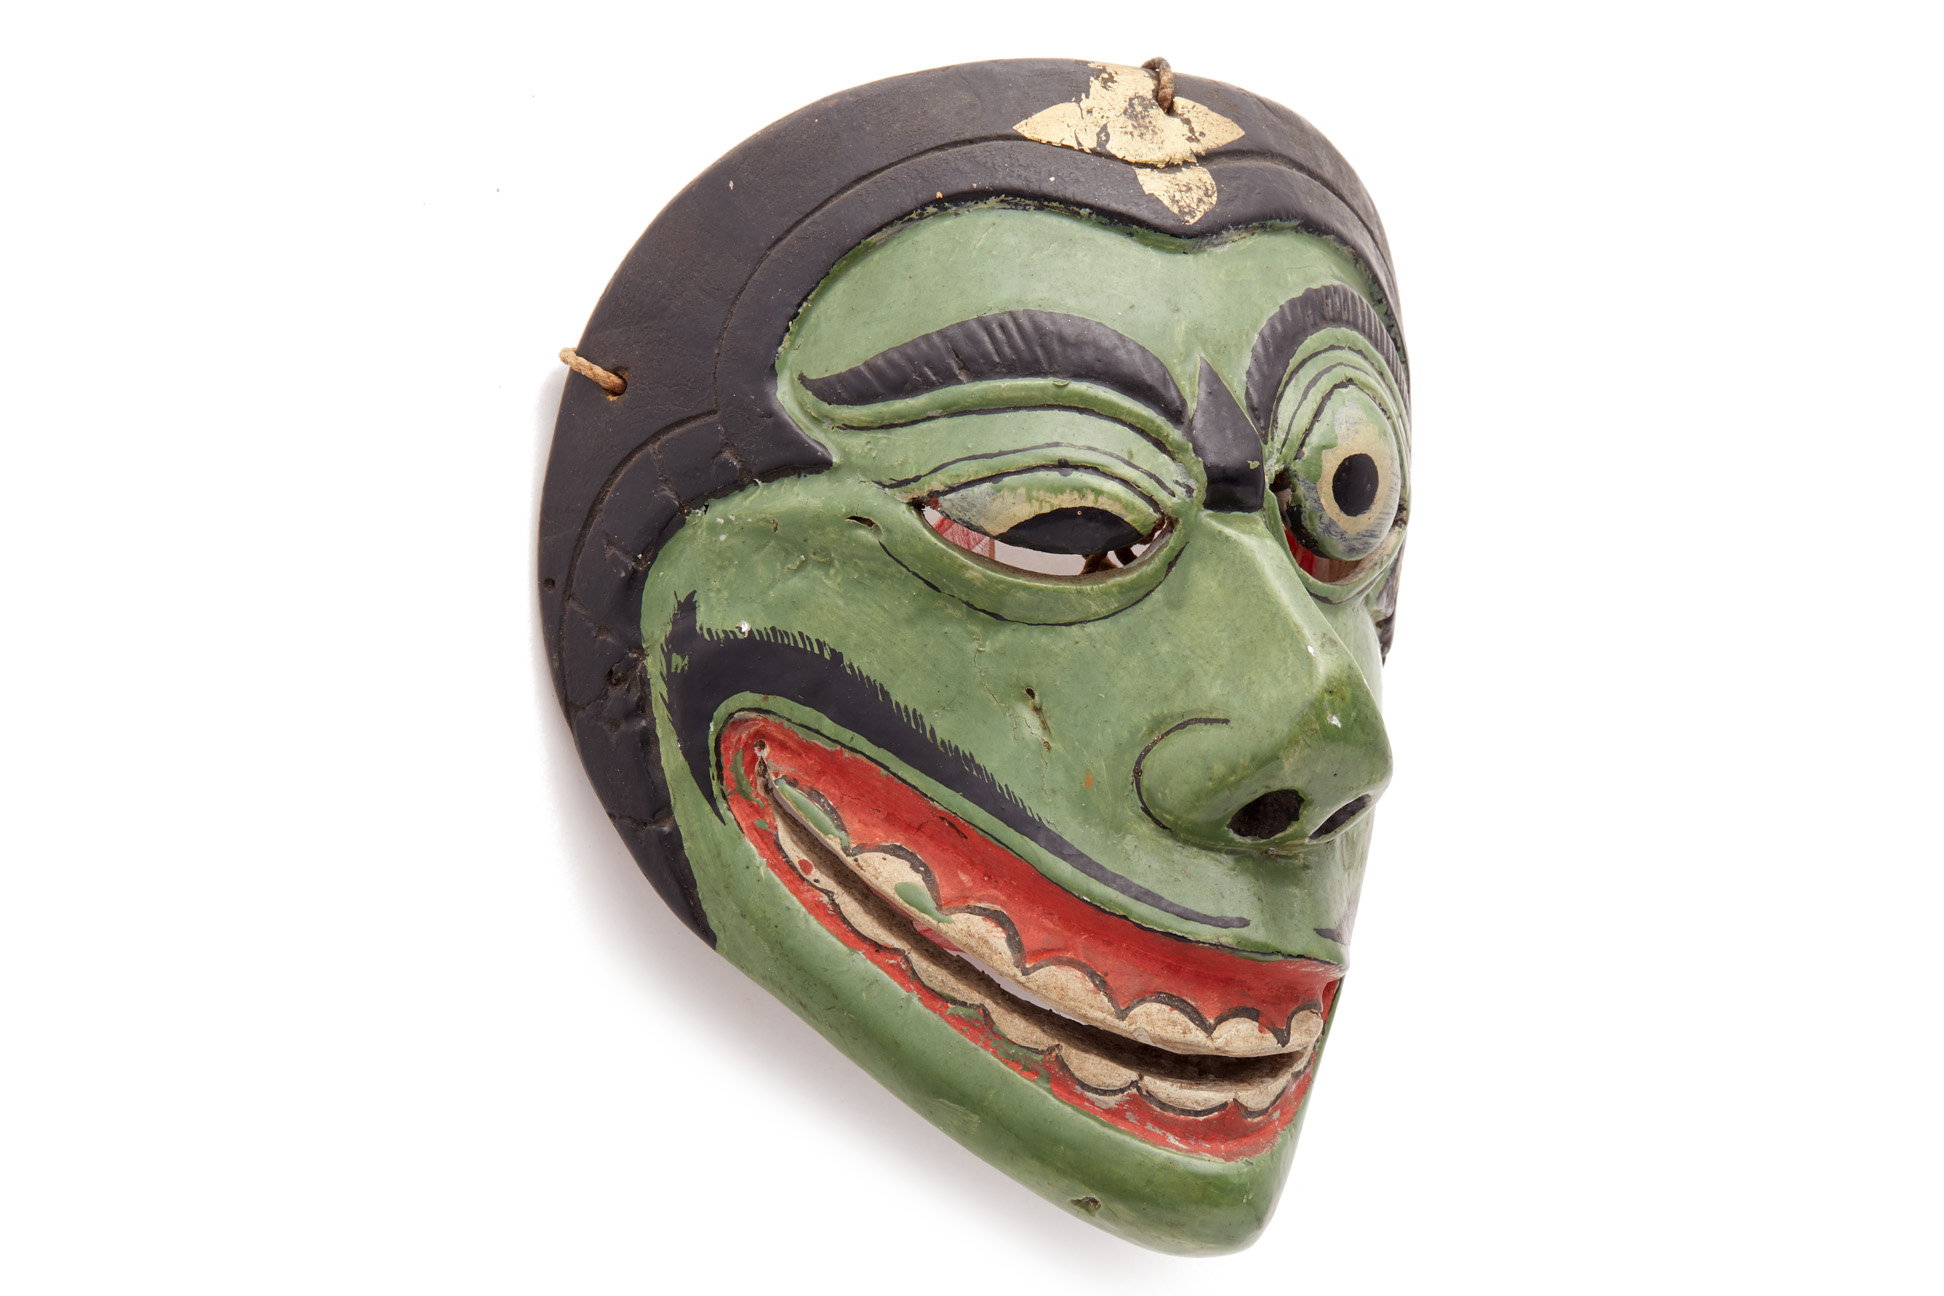 AN INDONESIAN TOPENG DANCE MASK OF A CLOWN CHARACTER - Image 2 of 6